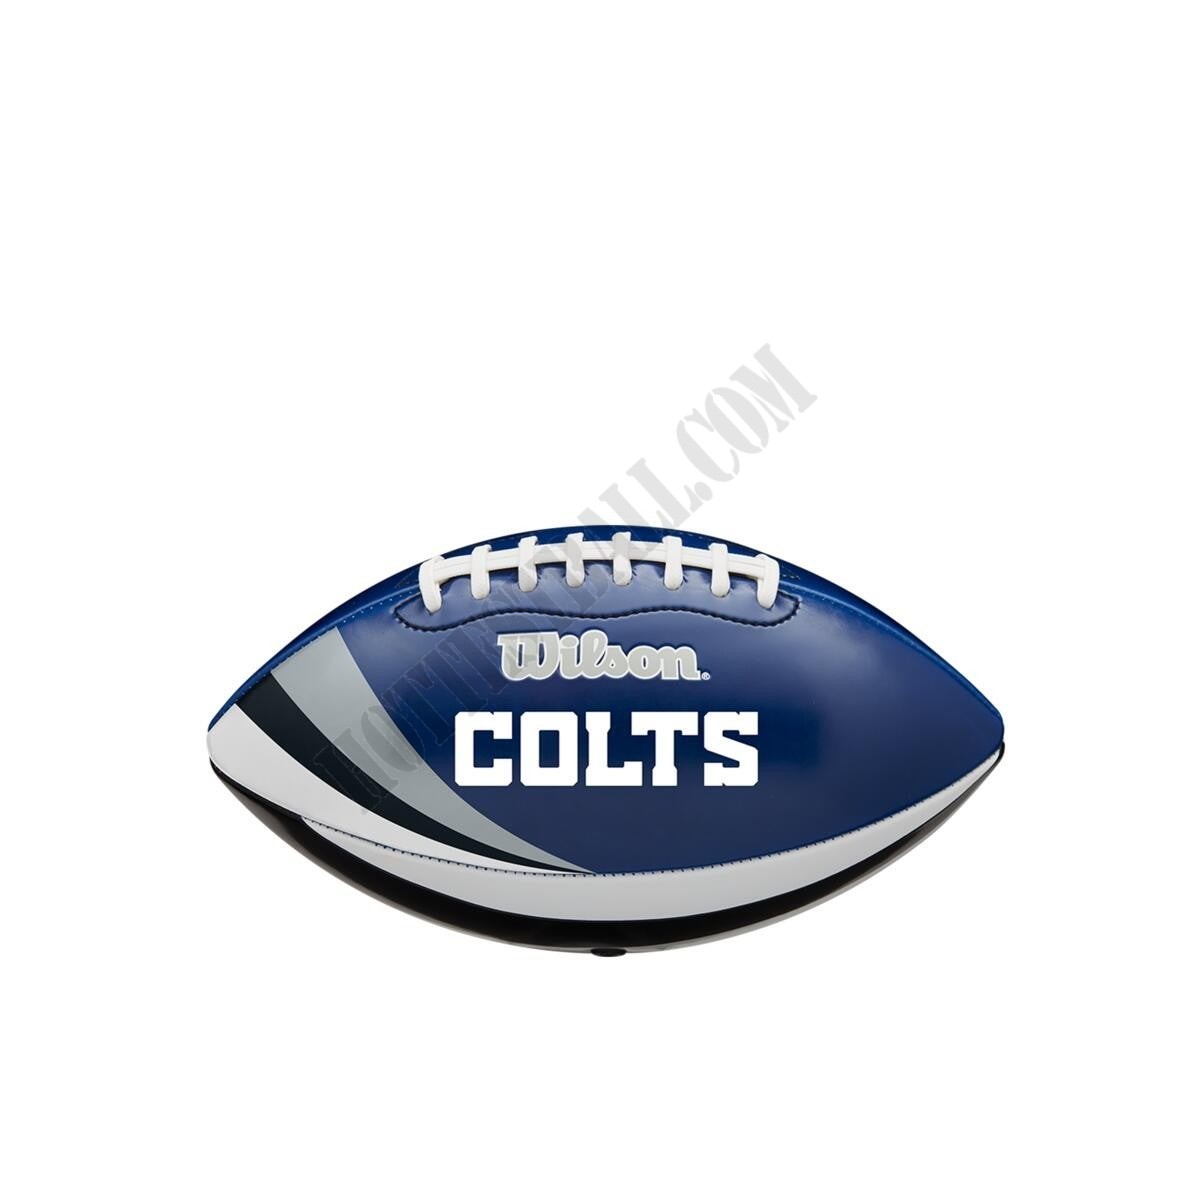 NFL City Pride Football - Indianapolis Colts ● Wilson Promotions - -1